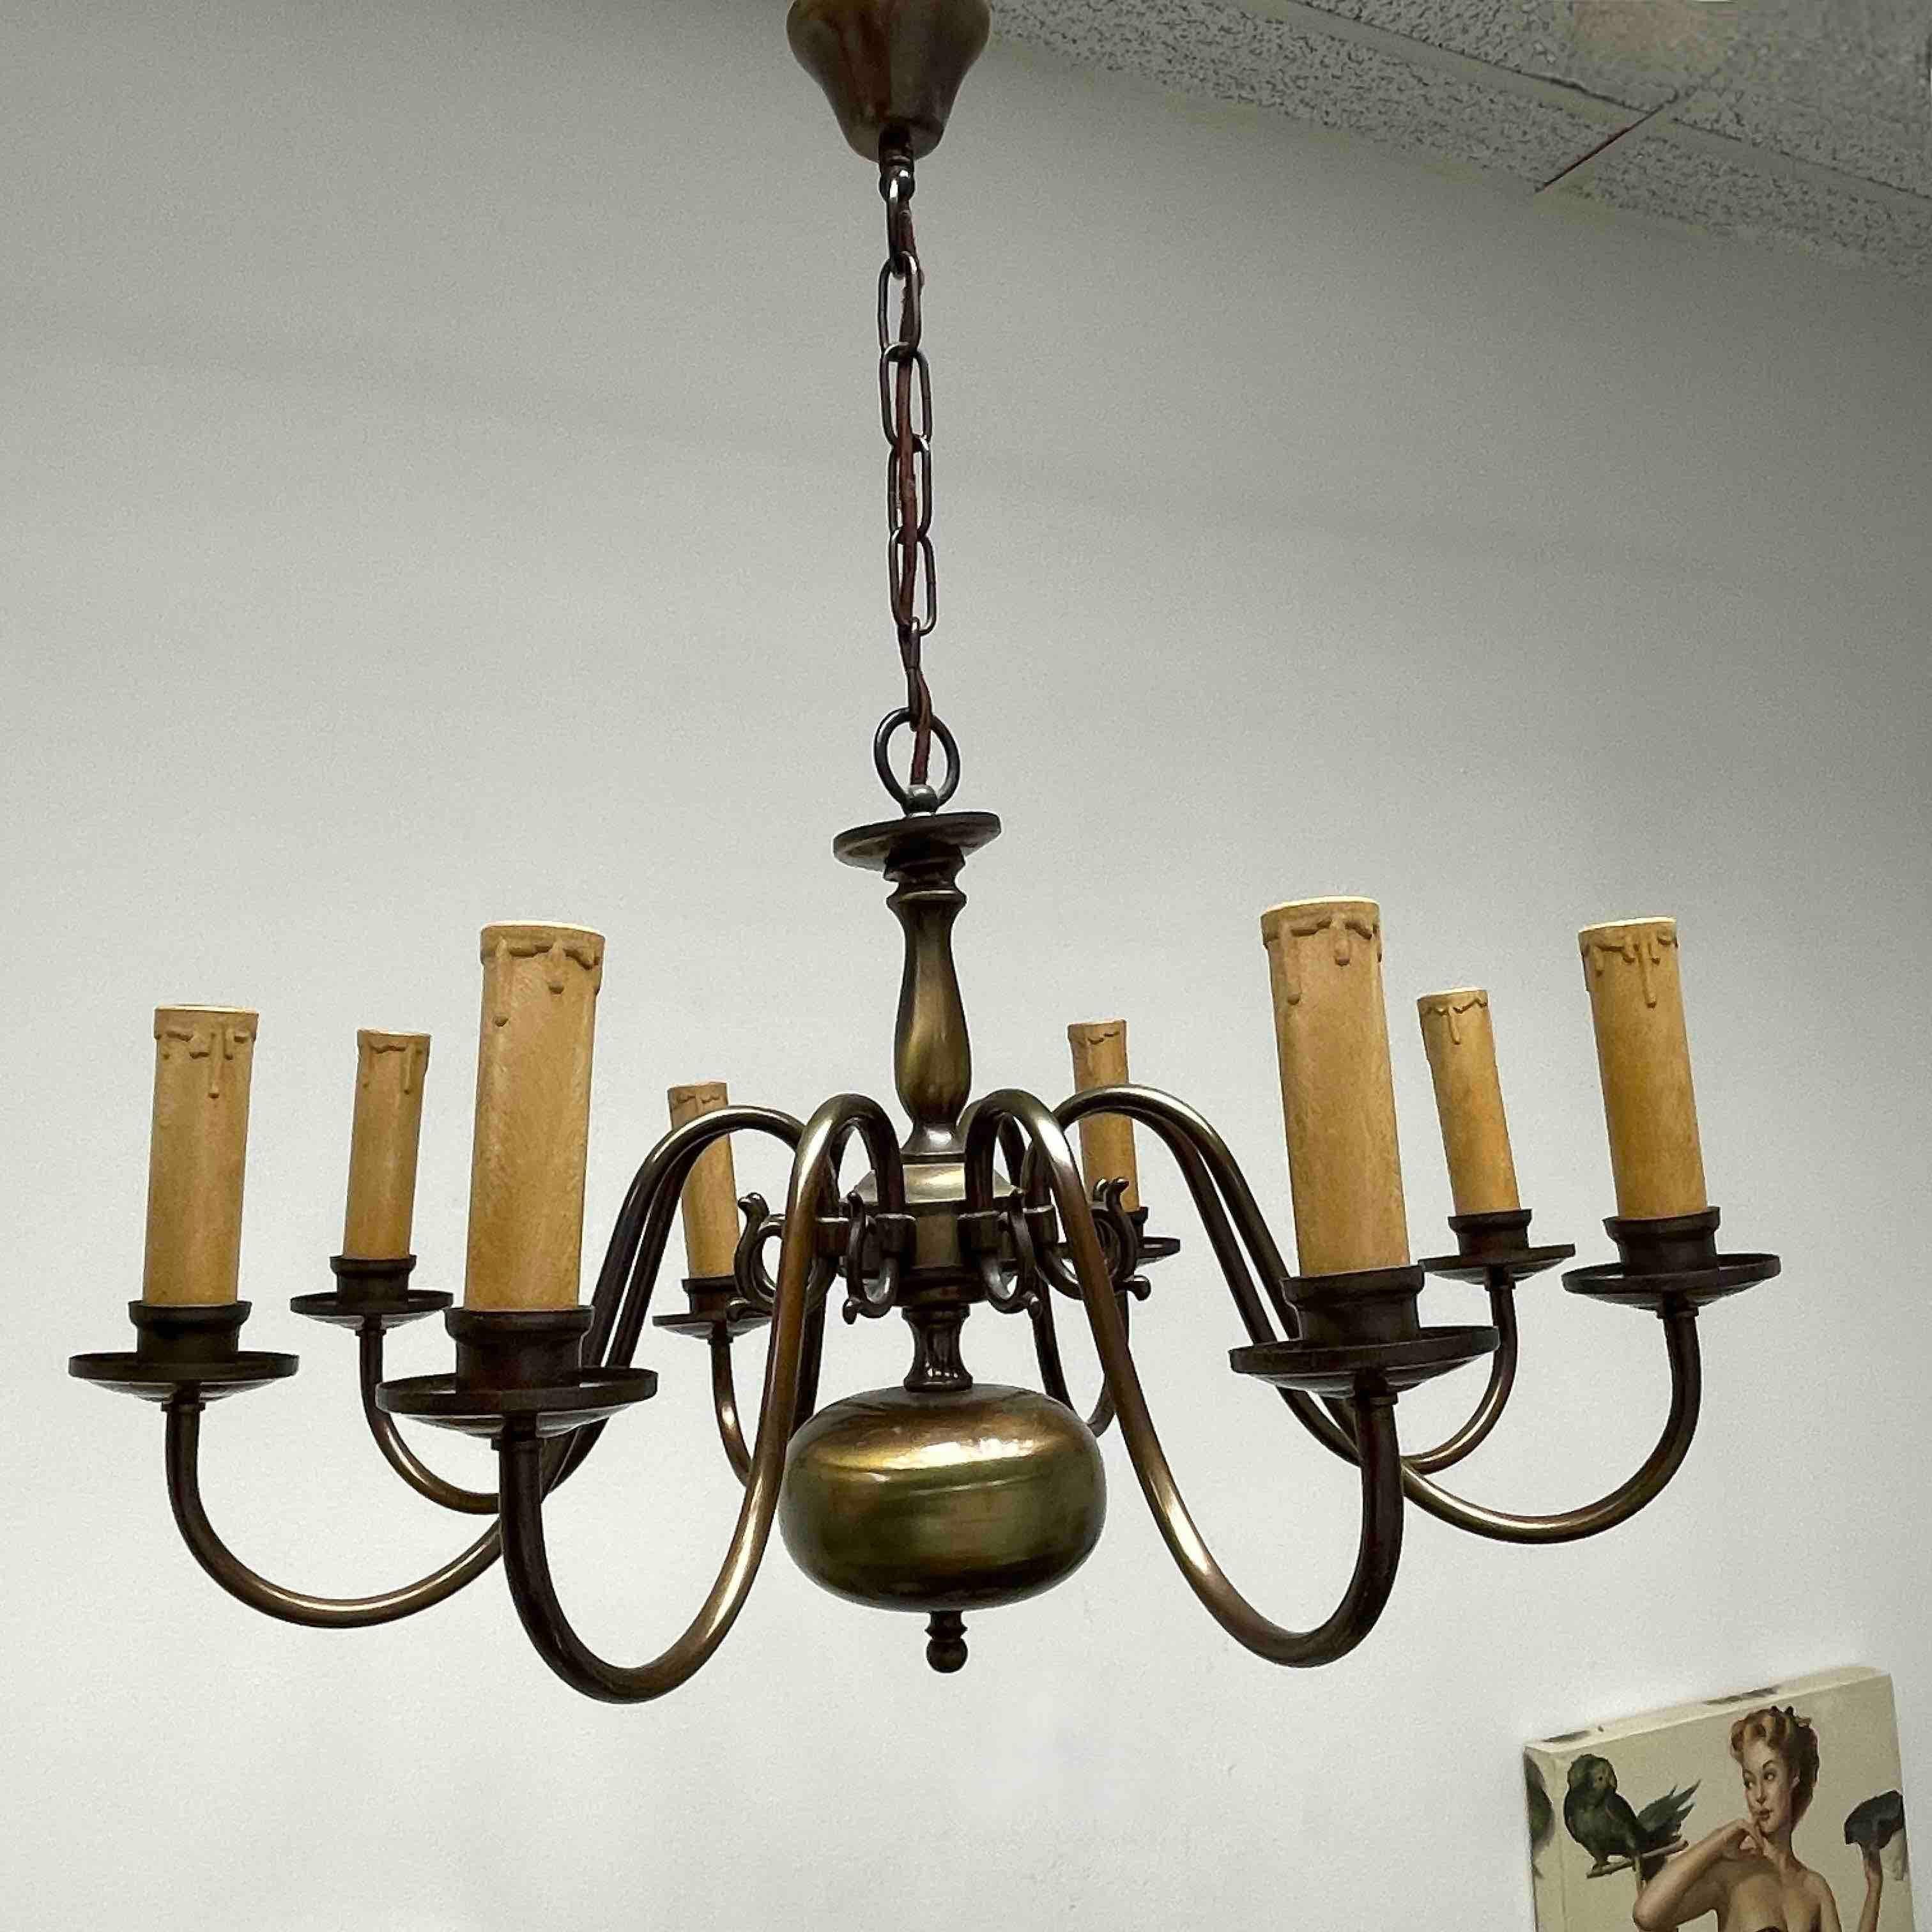 Add a touch of opulence to your home with this charming chandelier! Perfect burnished Metal to enhance any chic or eclectic home. We'd love to see it hanging in an entry hall or in a Living / Dinning room area. Built in the 1930s, attributed to a